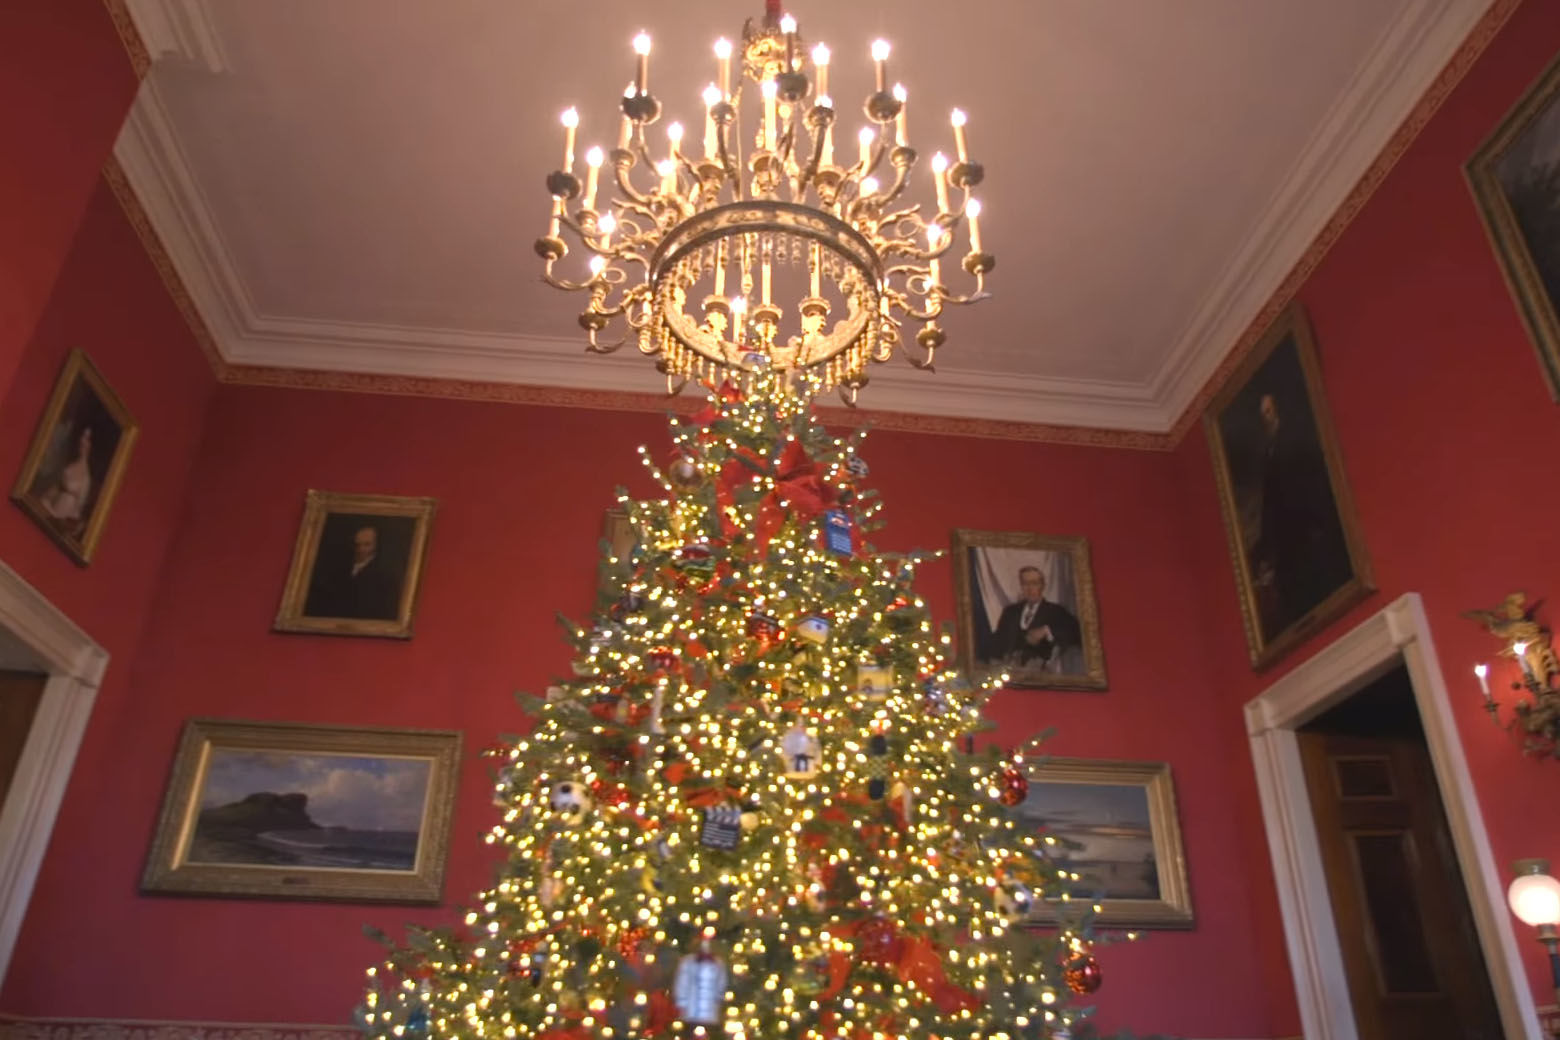 The White House on Monday released a video showing first lady Melania Trump decorating the Executive Mansion for the holidays. The theme of this year's decorations is "American Treasures: Christmas at the White House." (Courtesy White House)